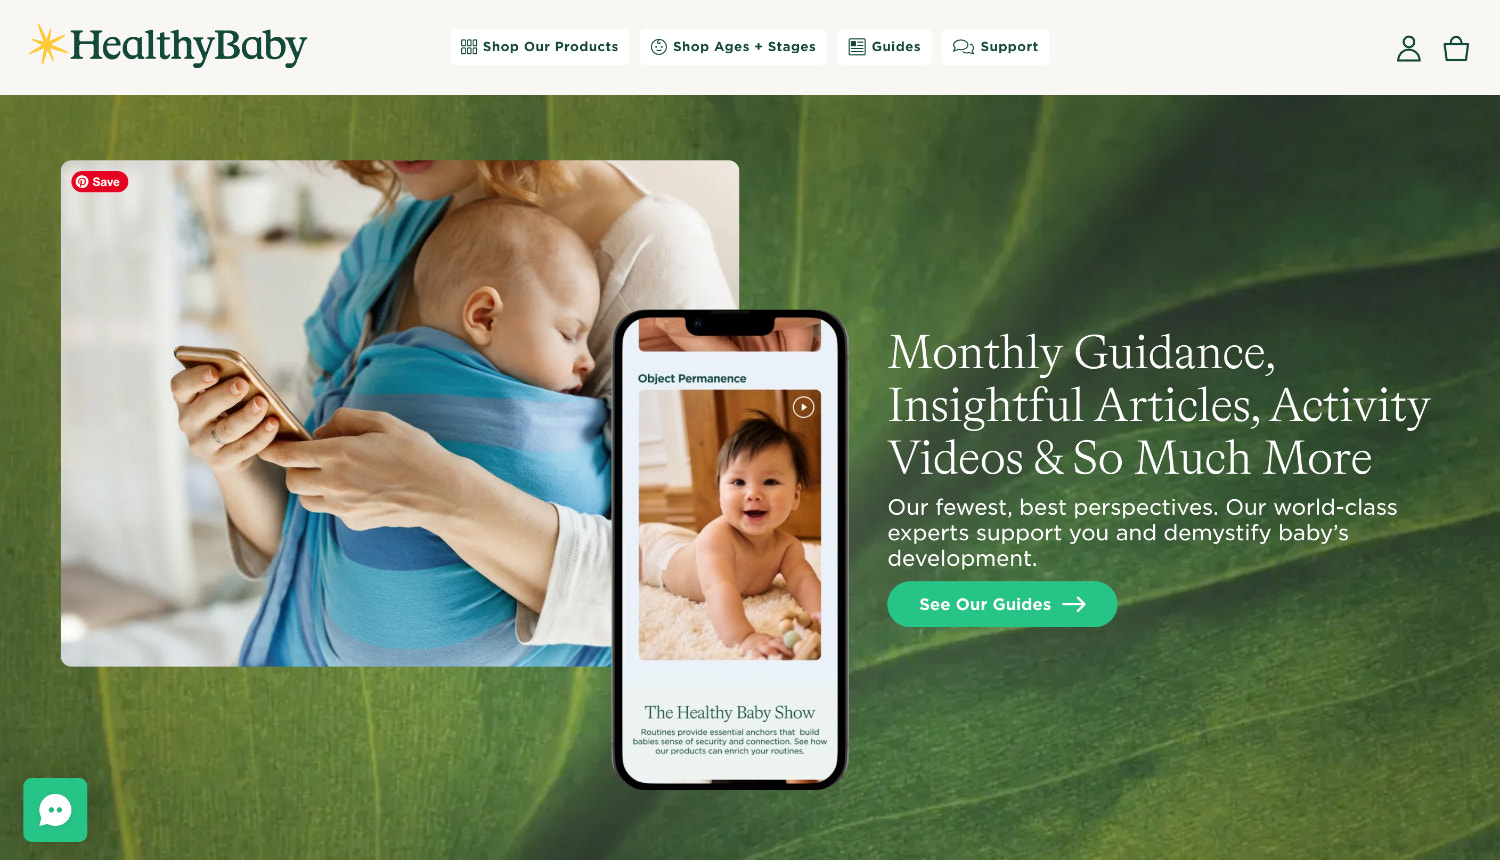 Homepage for the ecommerce website of brand HealthyBaby